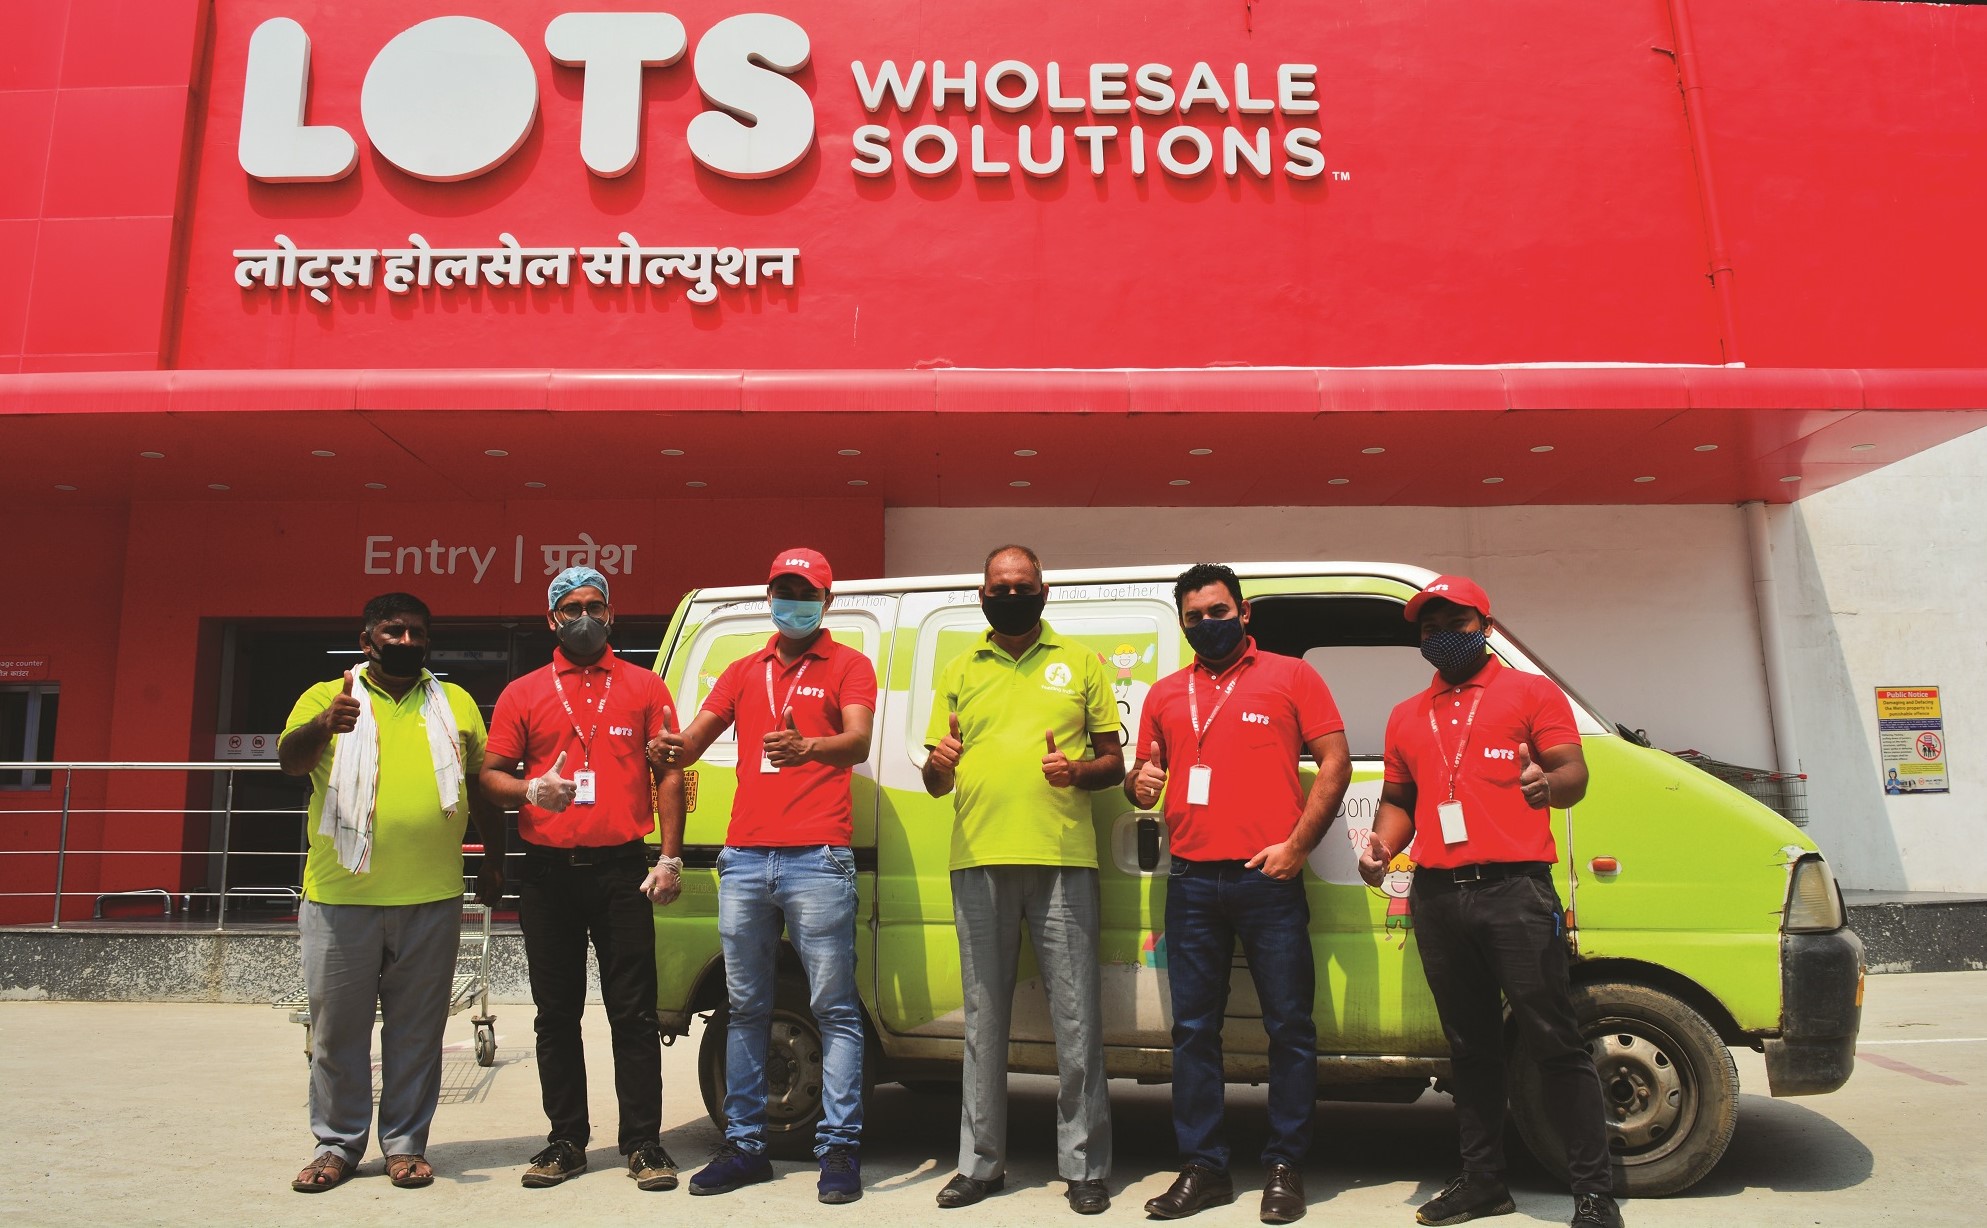 LOTS Wholesale Solutions pledges to fight hunger, partners with Zomato Feeding India amid COVID crisis to feed the needy